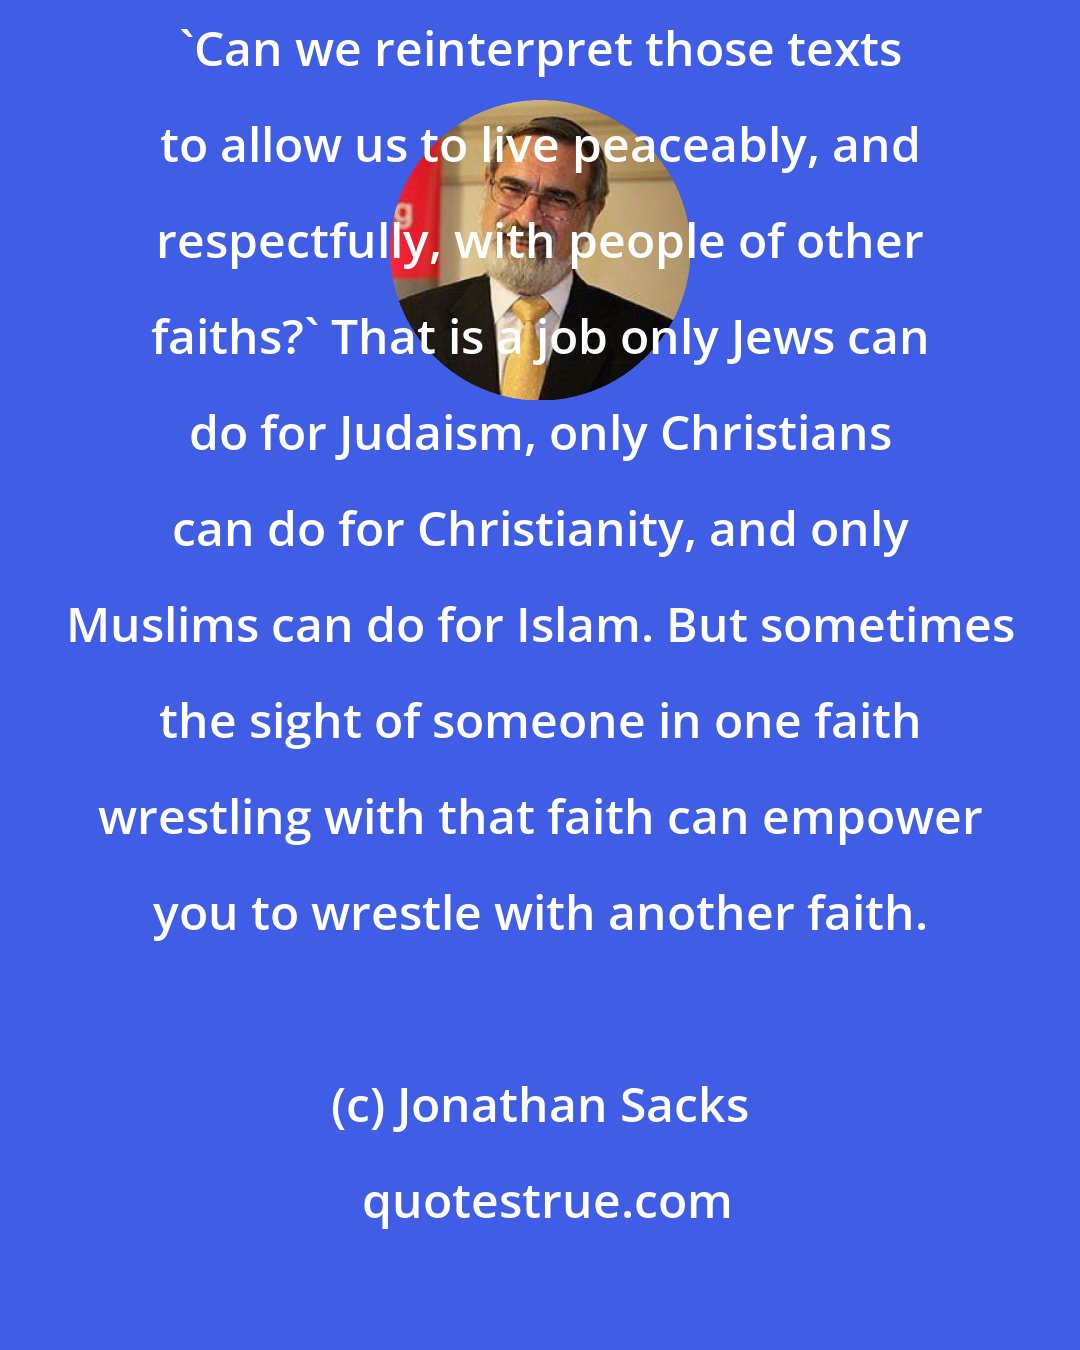 Jonathan Sacks: There are hard texts in each tradition which we must confront and ask ourselves, 'Can we reinterpret those texts to allow us to live peaceably, and respectfully, with people of other faiths?' That is a job only Jews can do for Judaism, only Christians can do for Christianity, and only Muslims can do for Islam. But sometimes the sight of someone in one faith wrestling with that faith can empower you to wrestle with another faith.